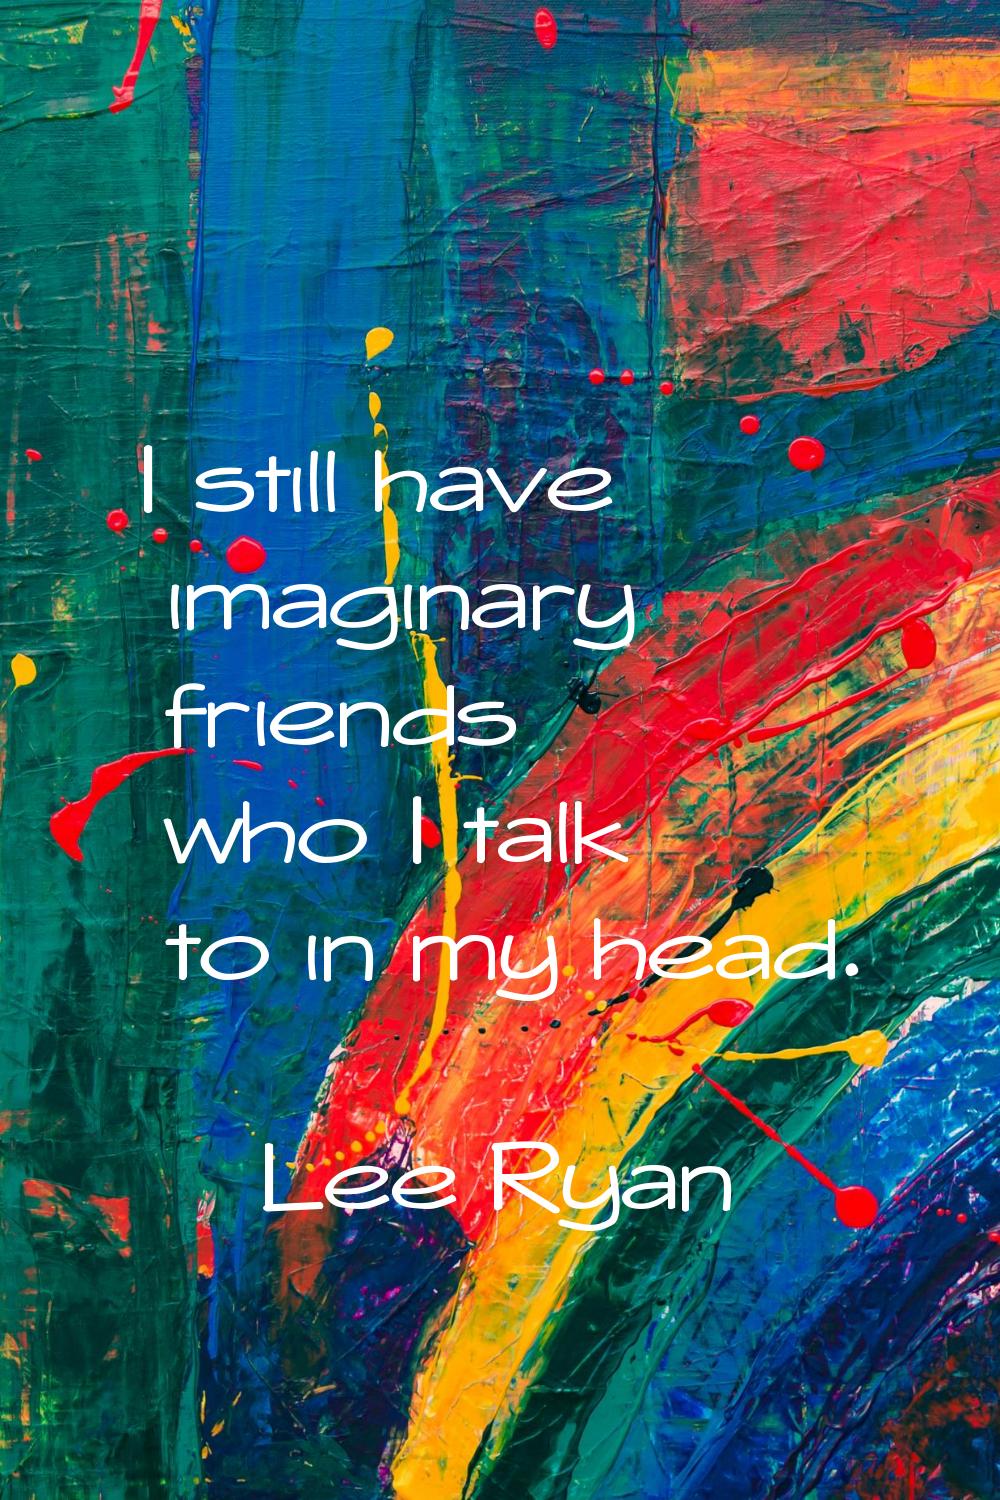 I still have imaginary friends who I talk to in my head.